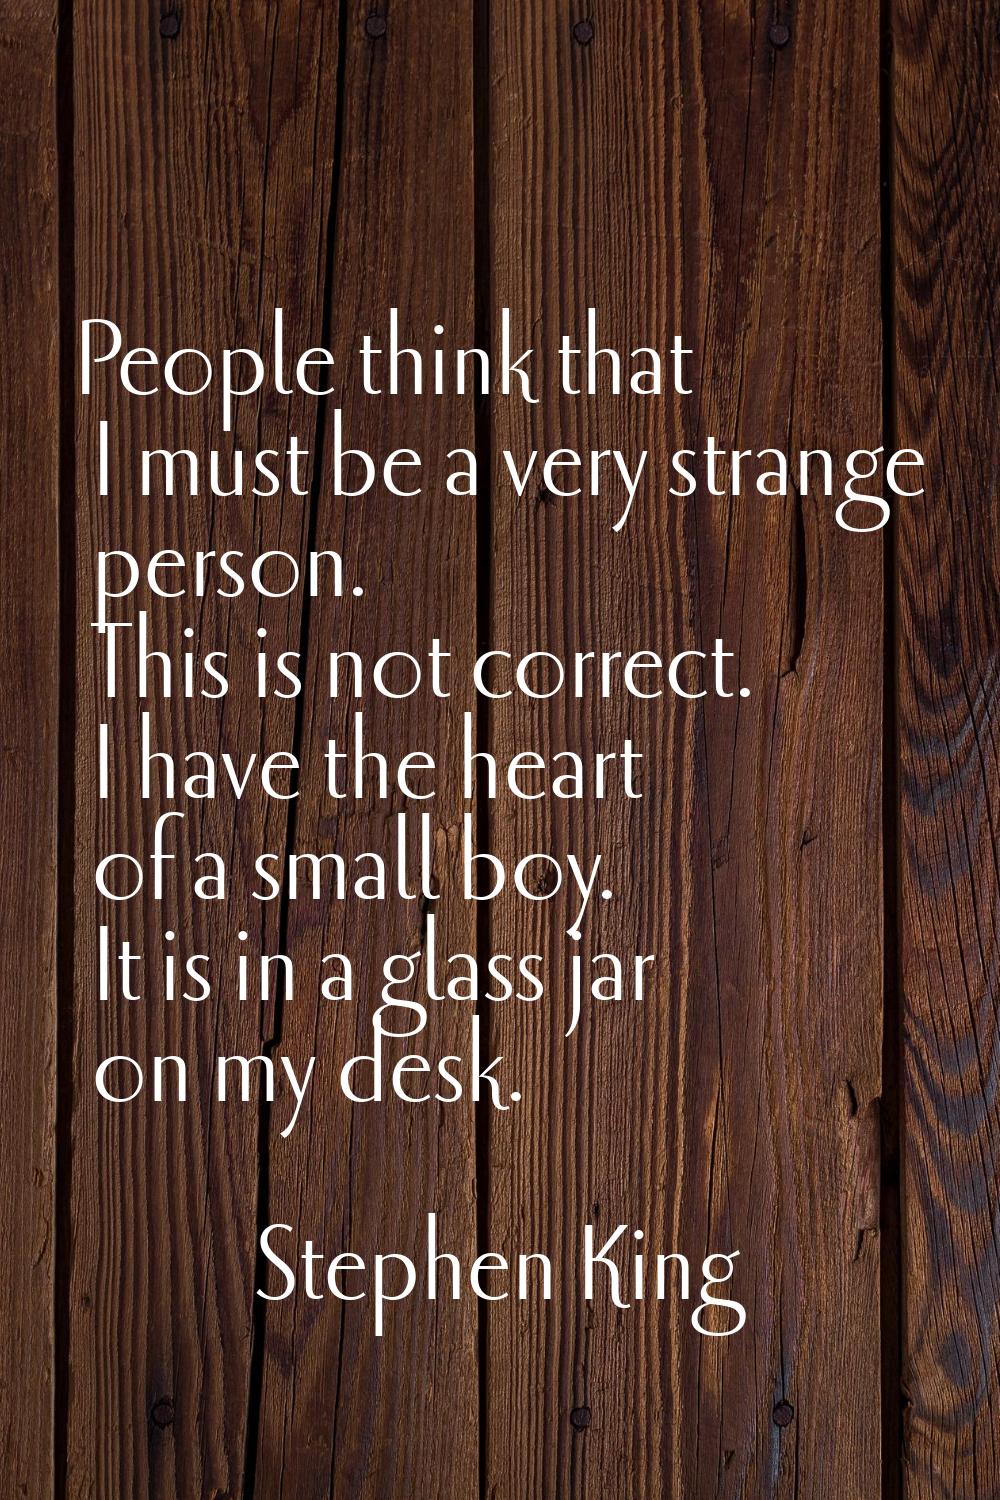 People think that I must be a very strange person. This is not correct. I have the heart of a small